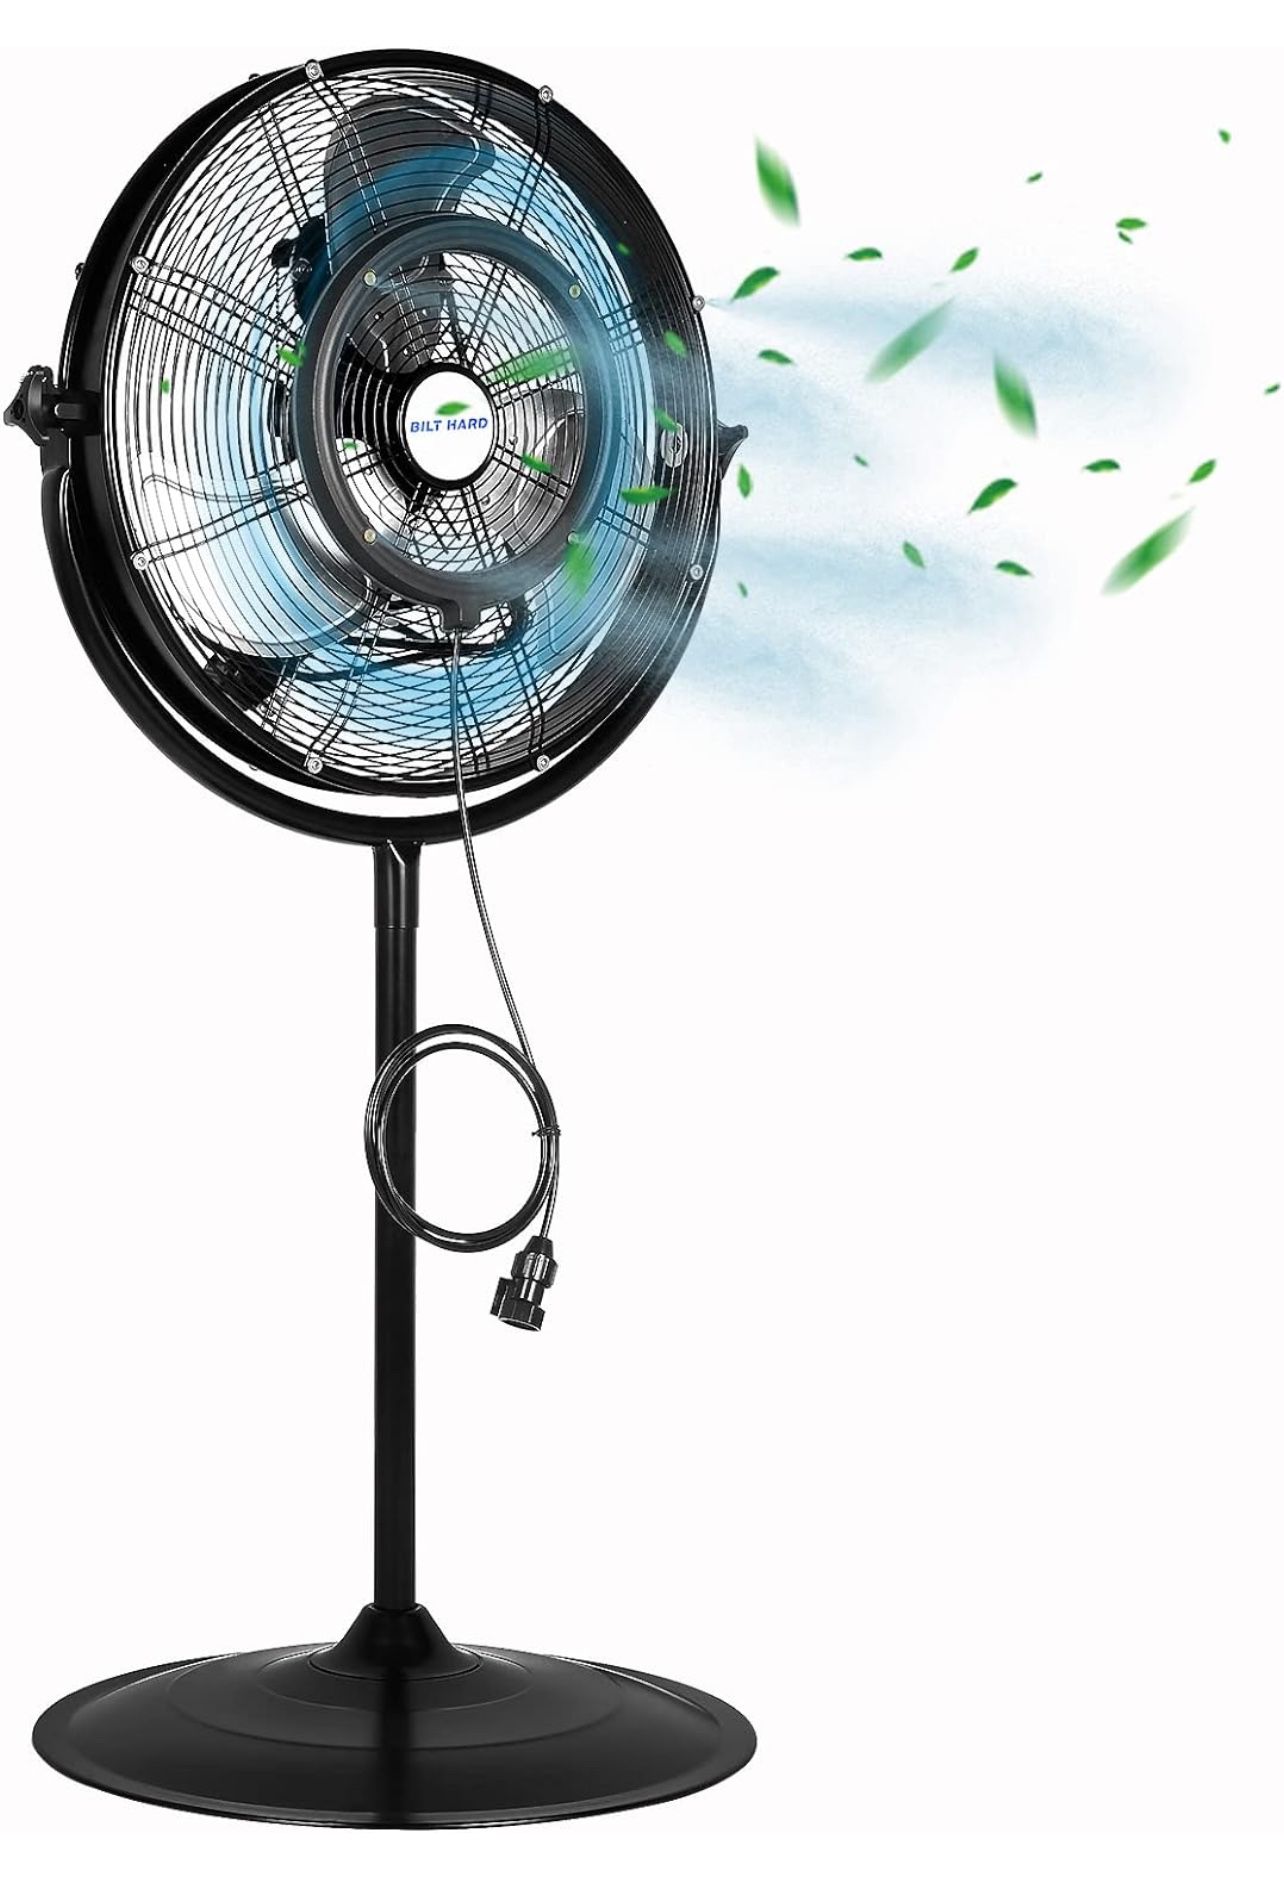 BILT HARD 20" Outdoor Pedestal Misting Fan, 3-Speed High-Velocity Patio Misting Fans for Outside, Waterproof Tilting Fan with Mists for Outdoor Coolin